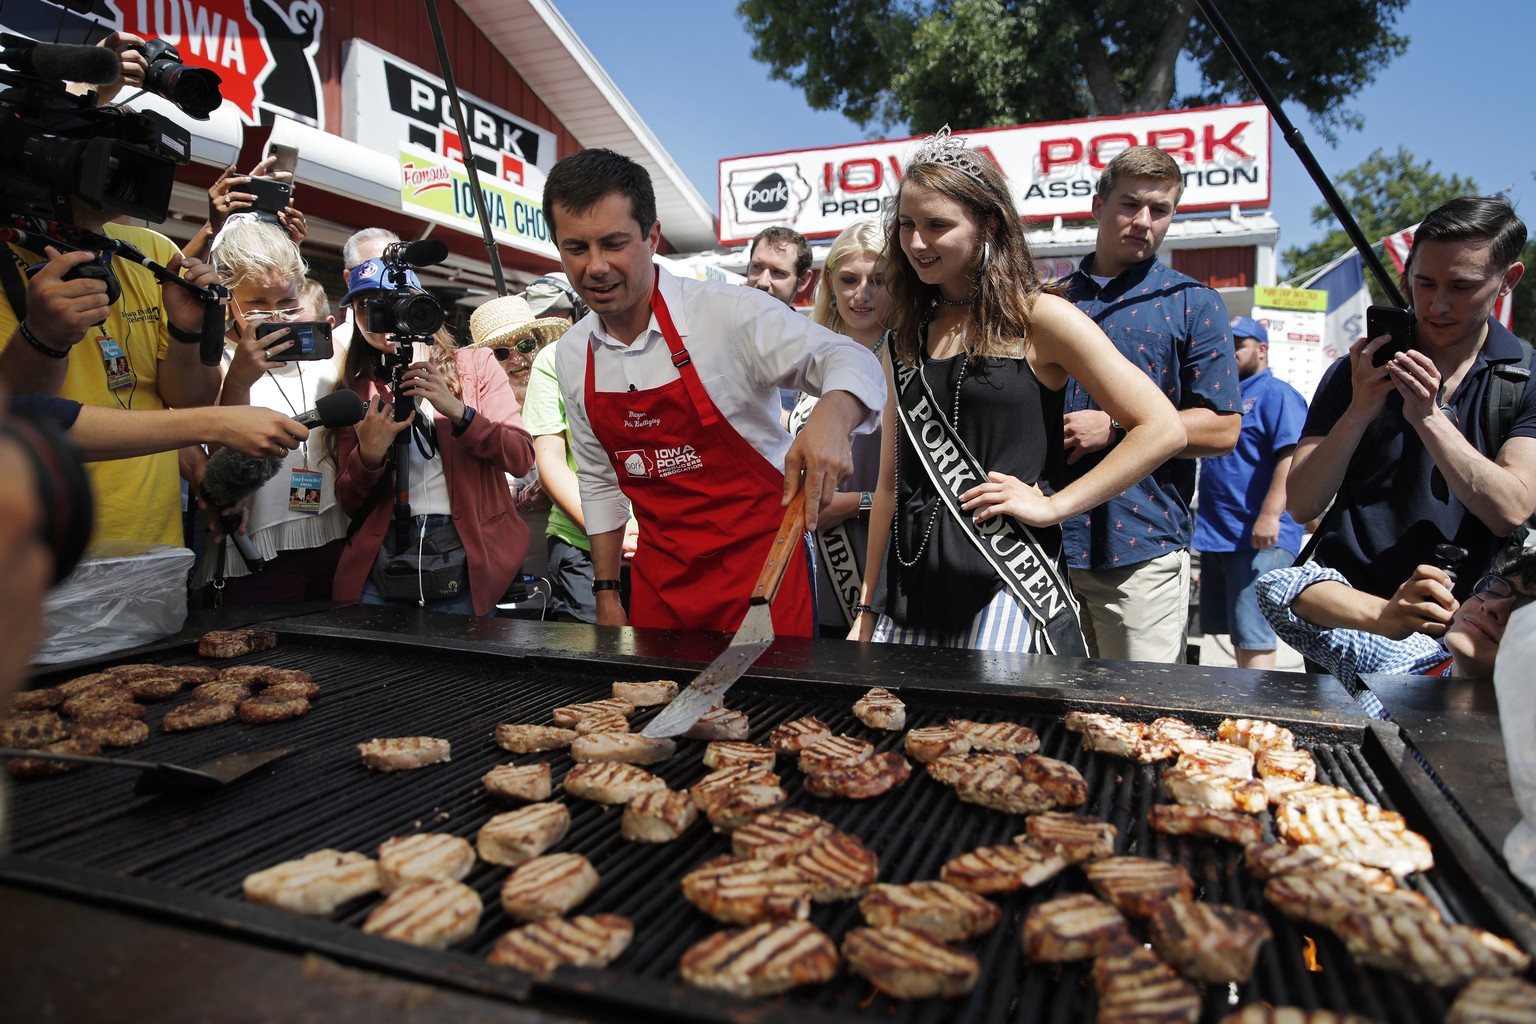 Democratic presidential candidate South Bend Mayor Pete Buttigieg helps cook pork at the Iowa State Fair, Tuesday, Aug. 13, 2019, in Des Moines, Iowa. (AP Photo/John Locher)